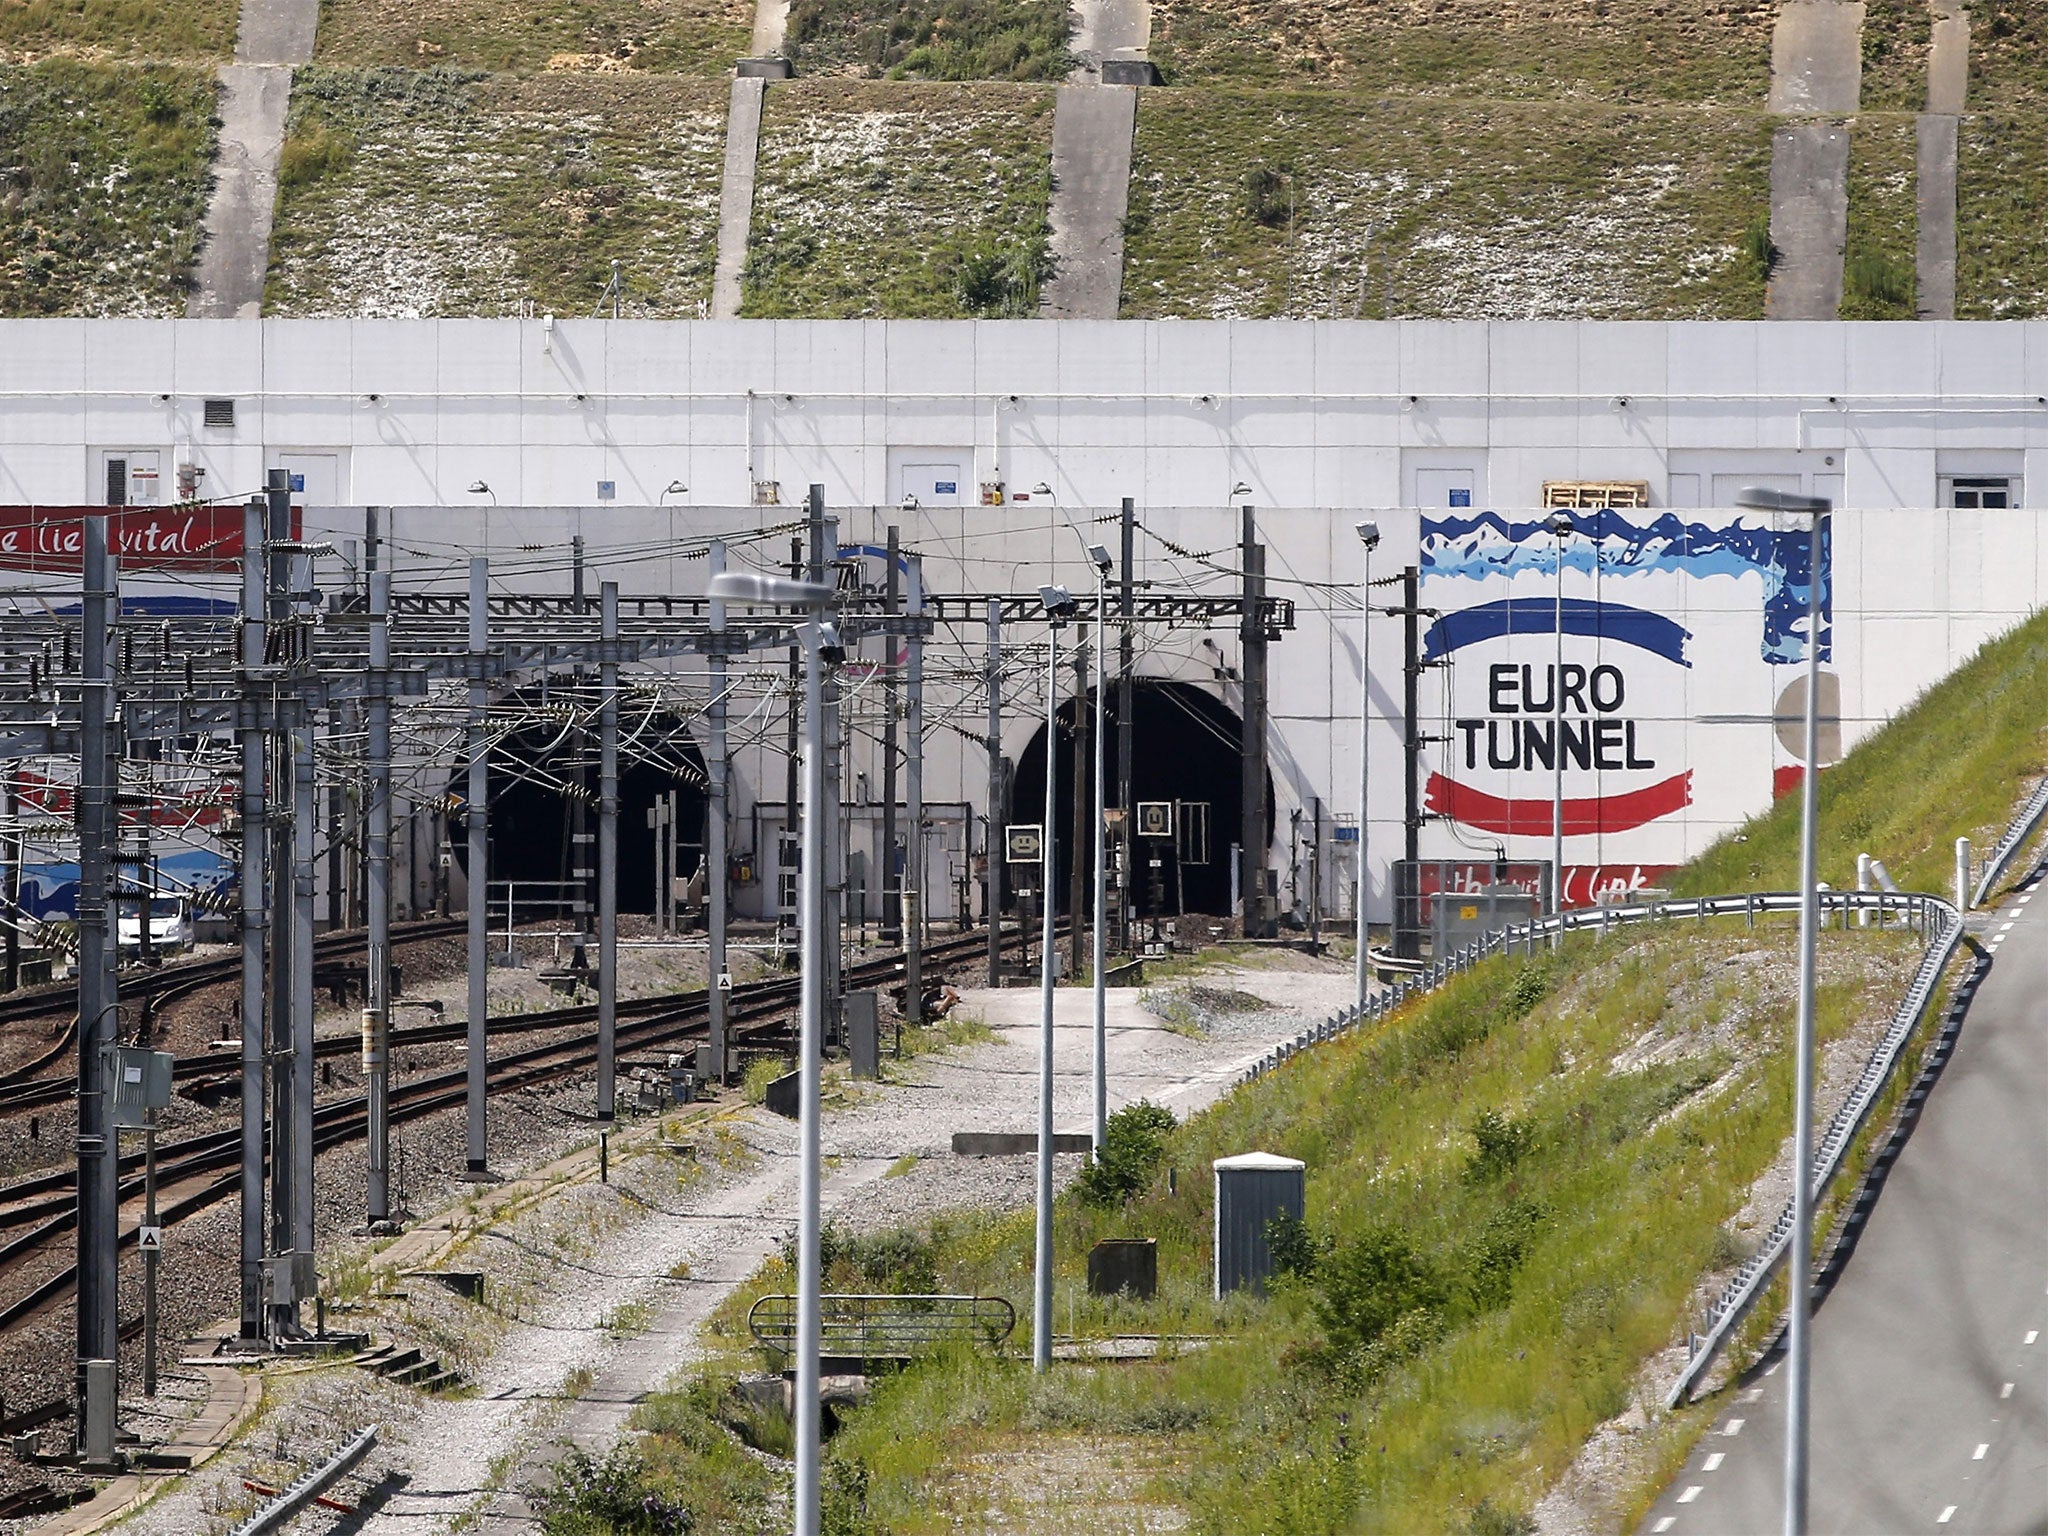 The men allegedly walked 31 miles through the tunnel from Calais to Folkestone, Kent